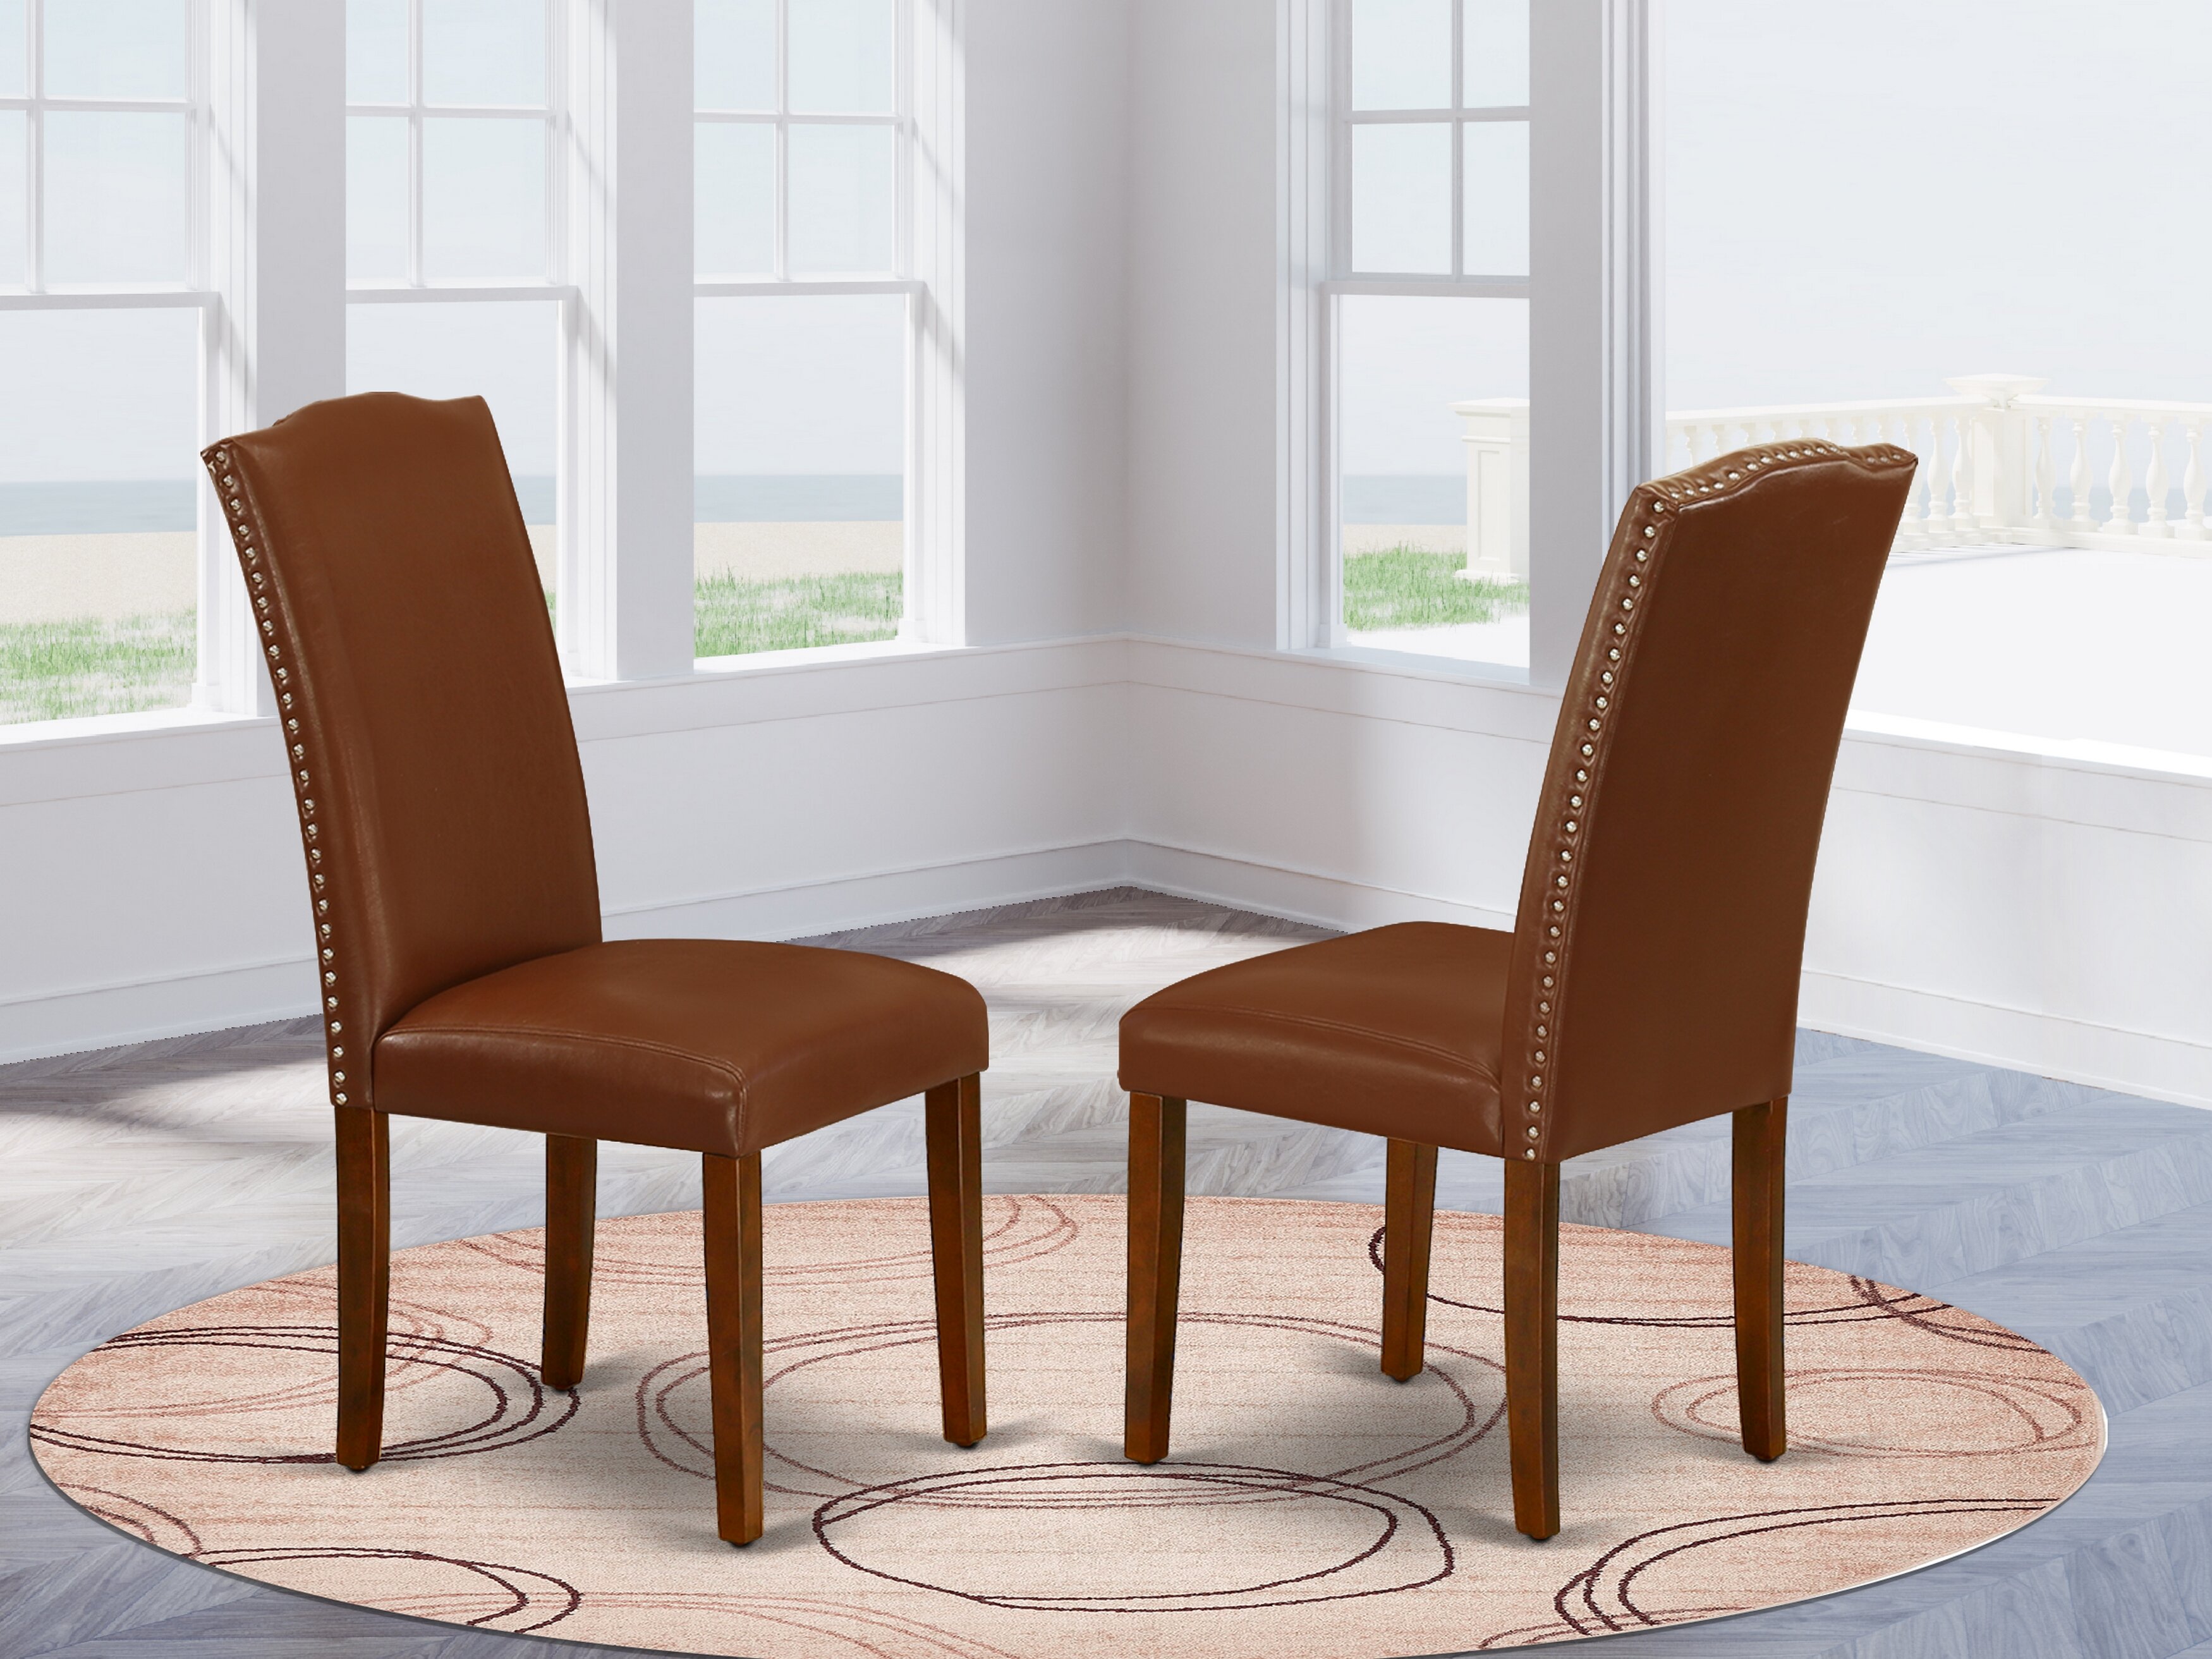 Upholstery Dining Room Chairs | Tyres2c